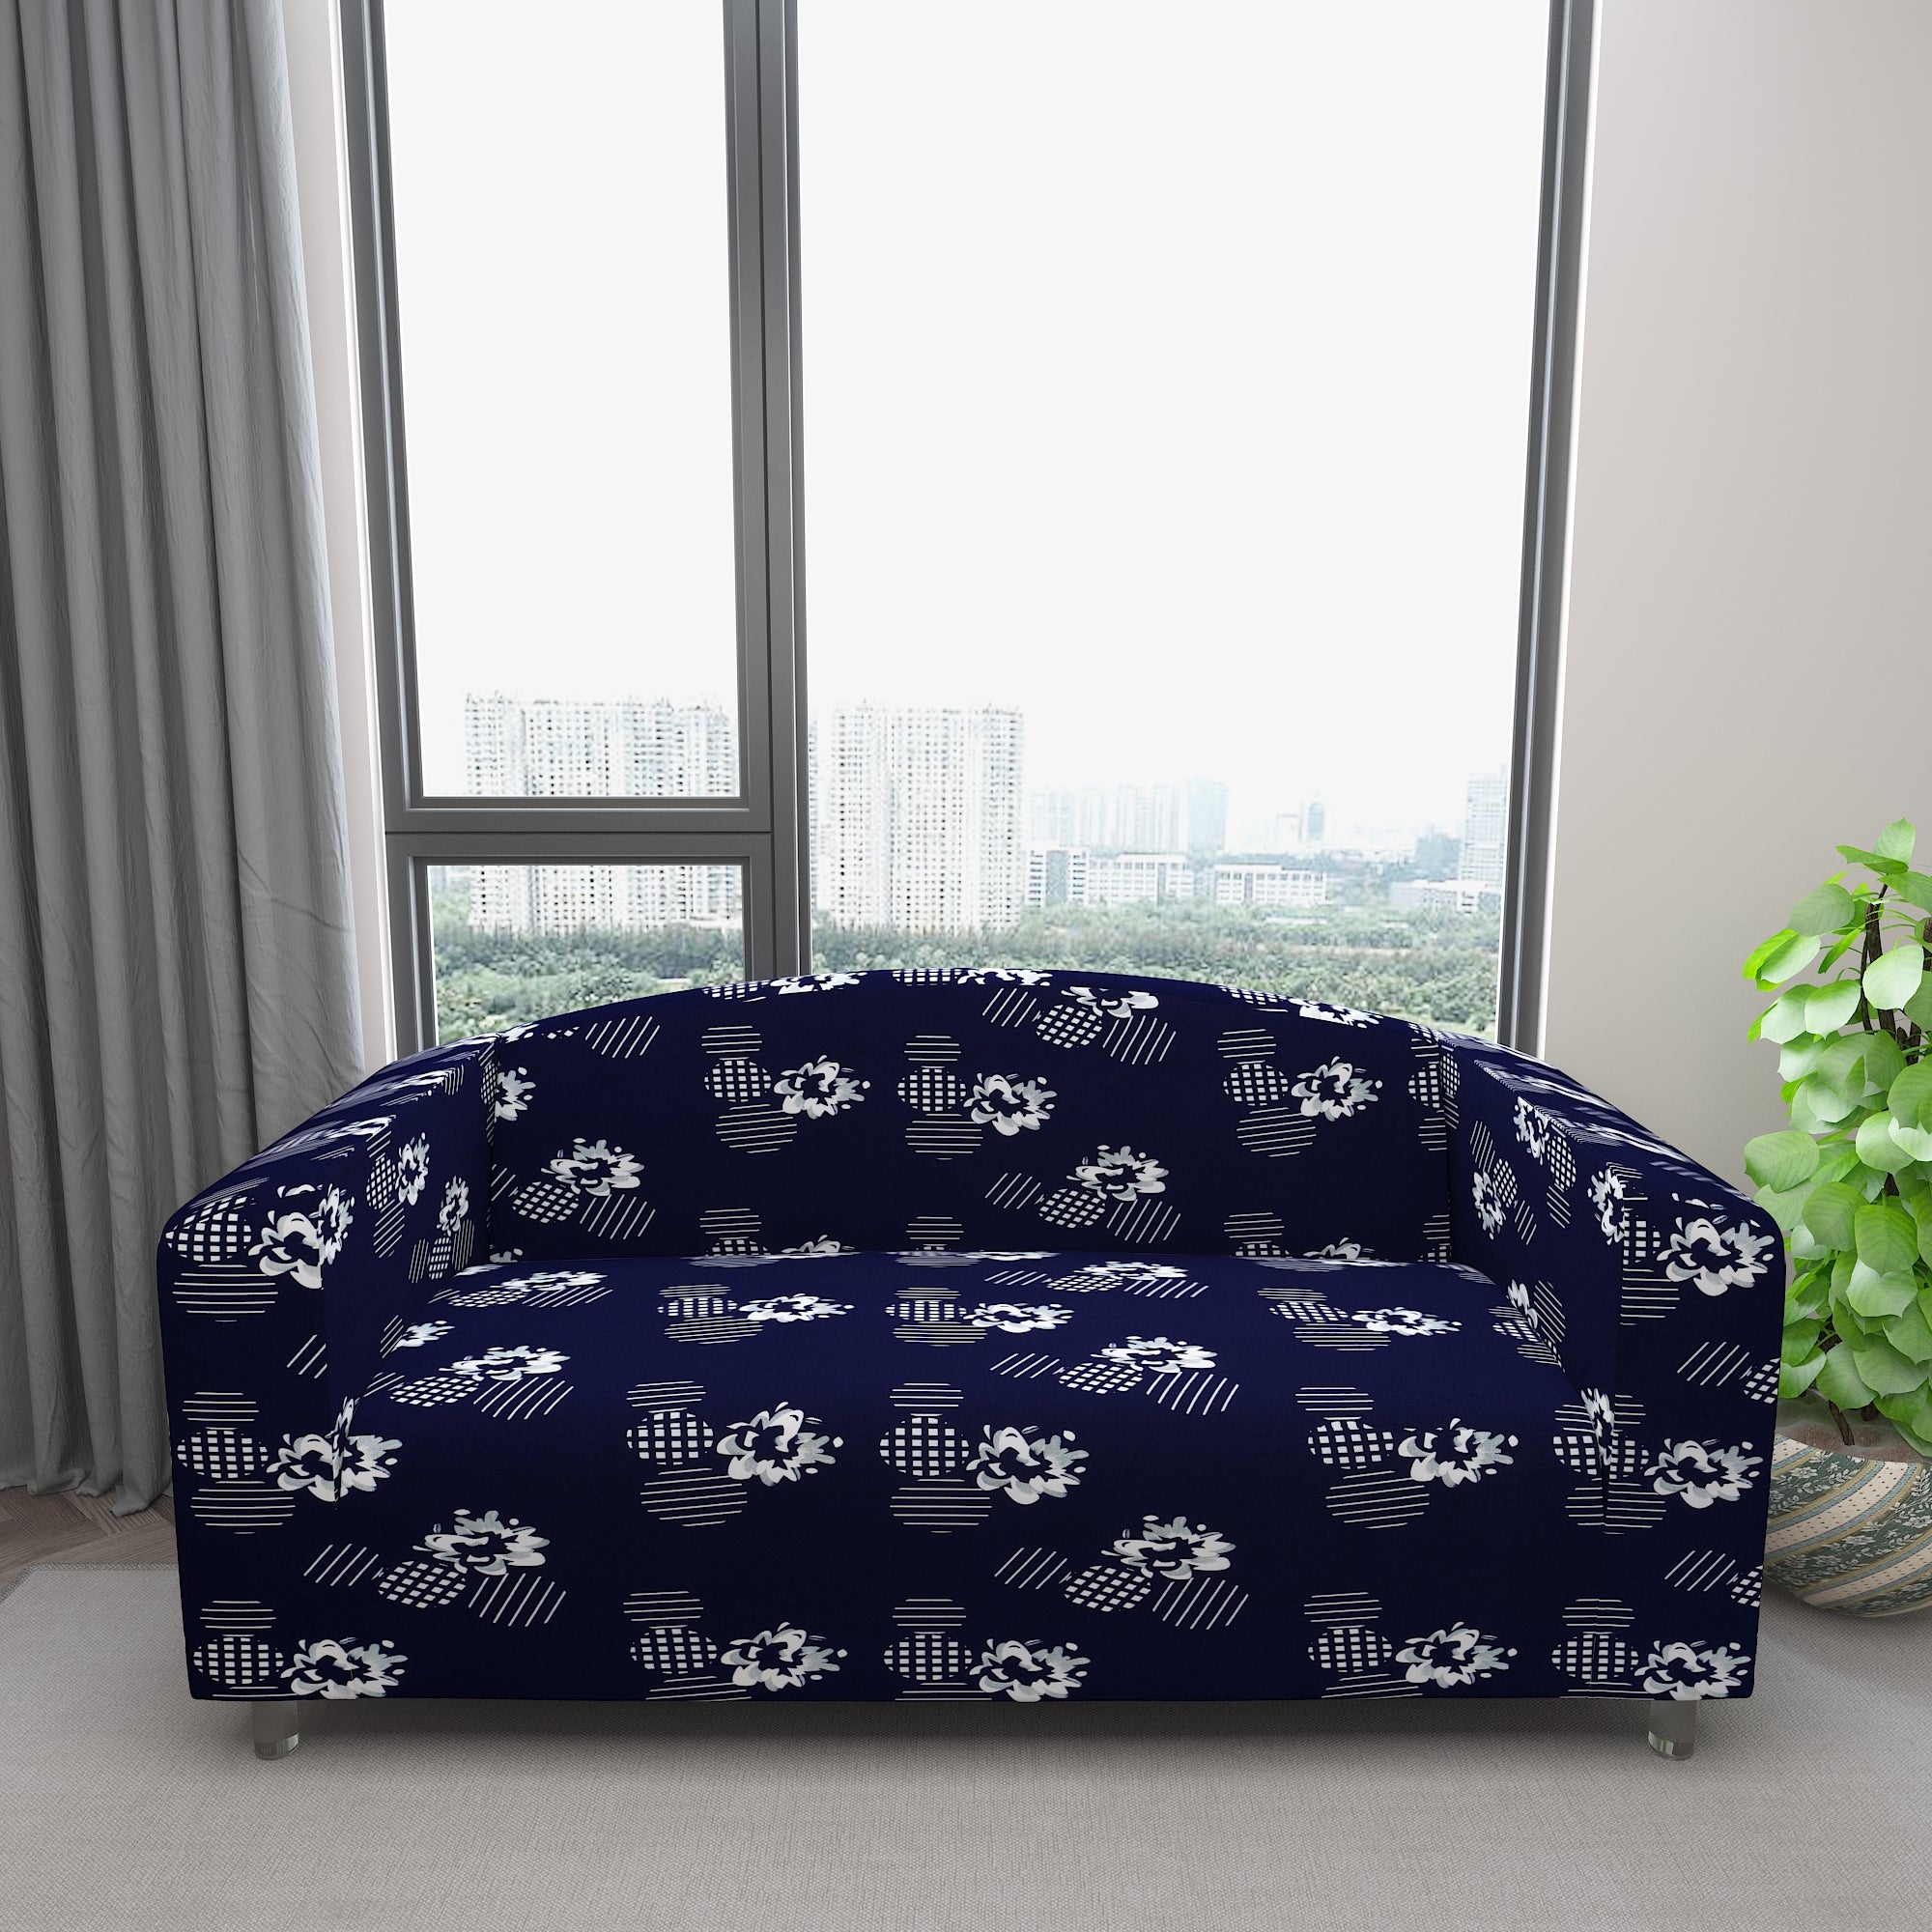 Waterproof Printed Sofa Protector Cover Full Stretchable, SP24 - Dream Care Furnishings Private Limited